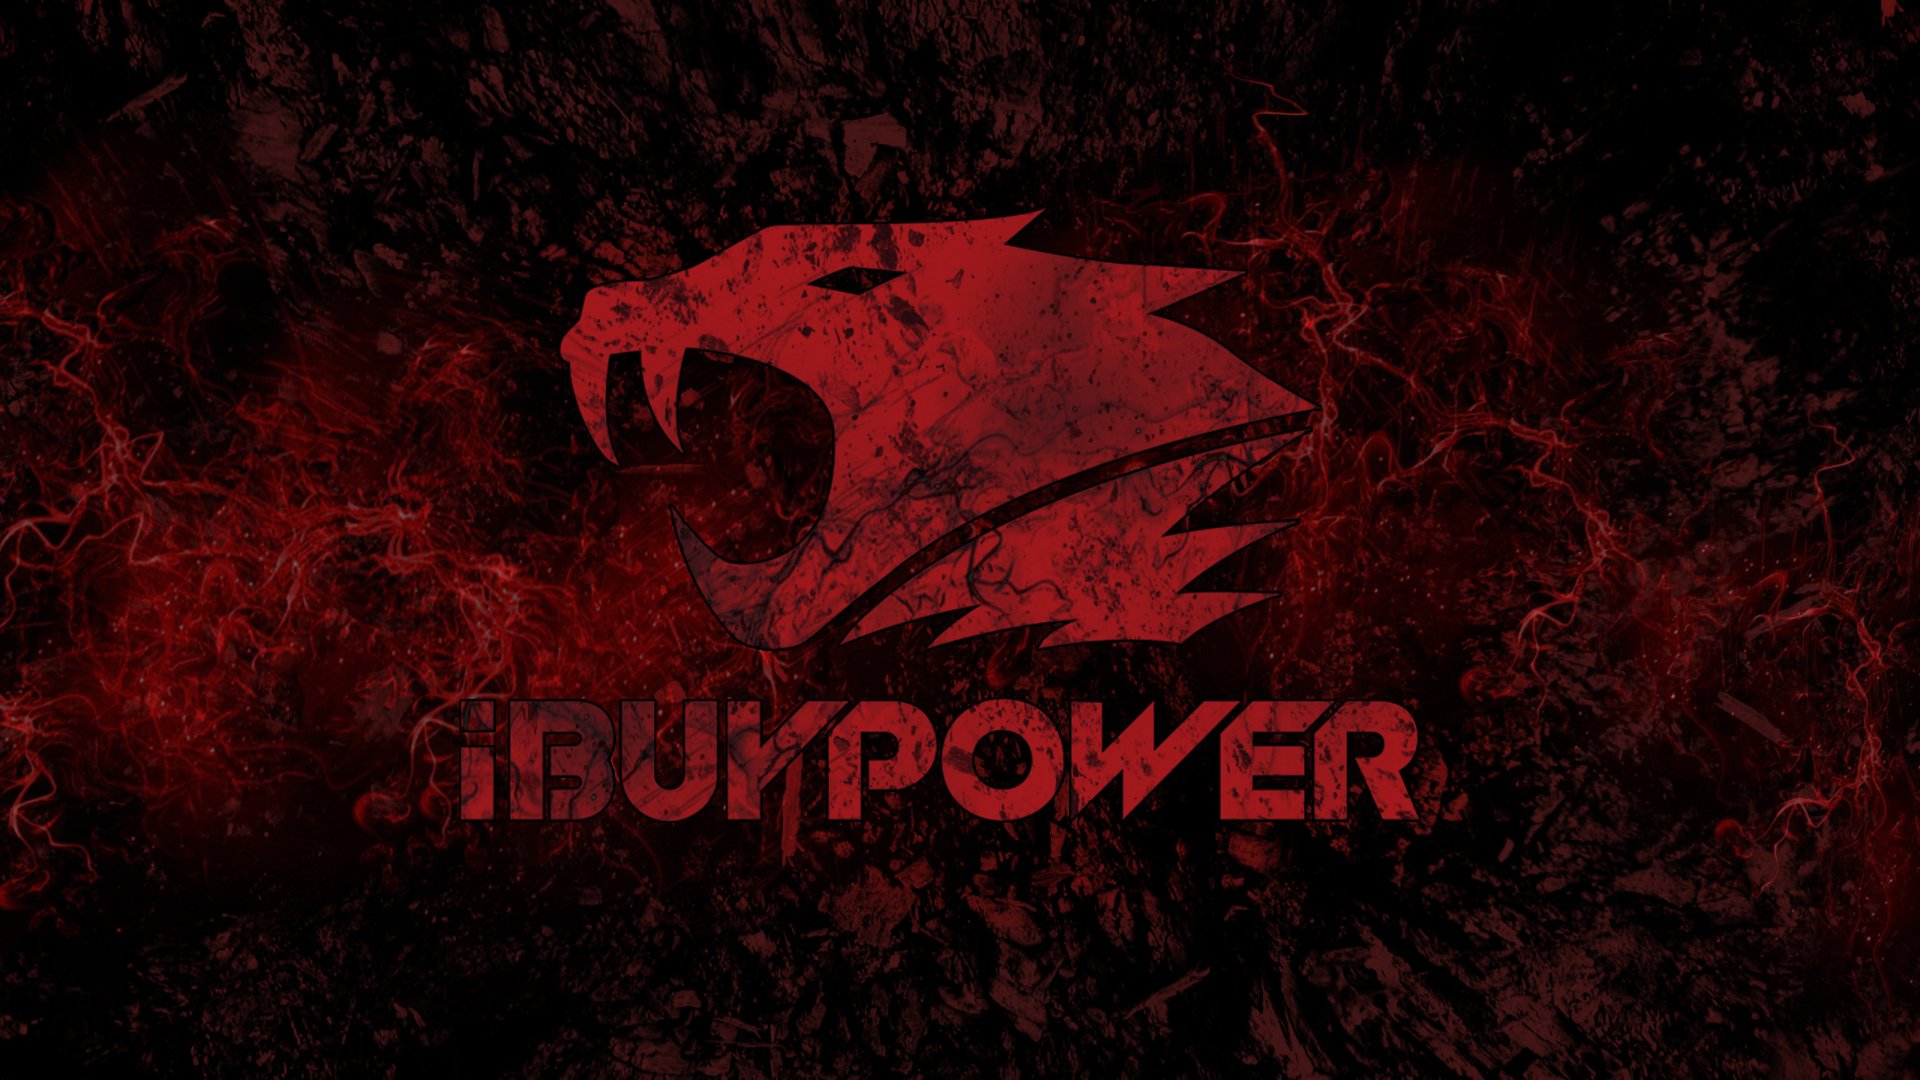 ibuypower Wallpapers HD / Desktop and Mobile Backgrounds.